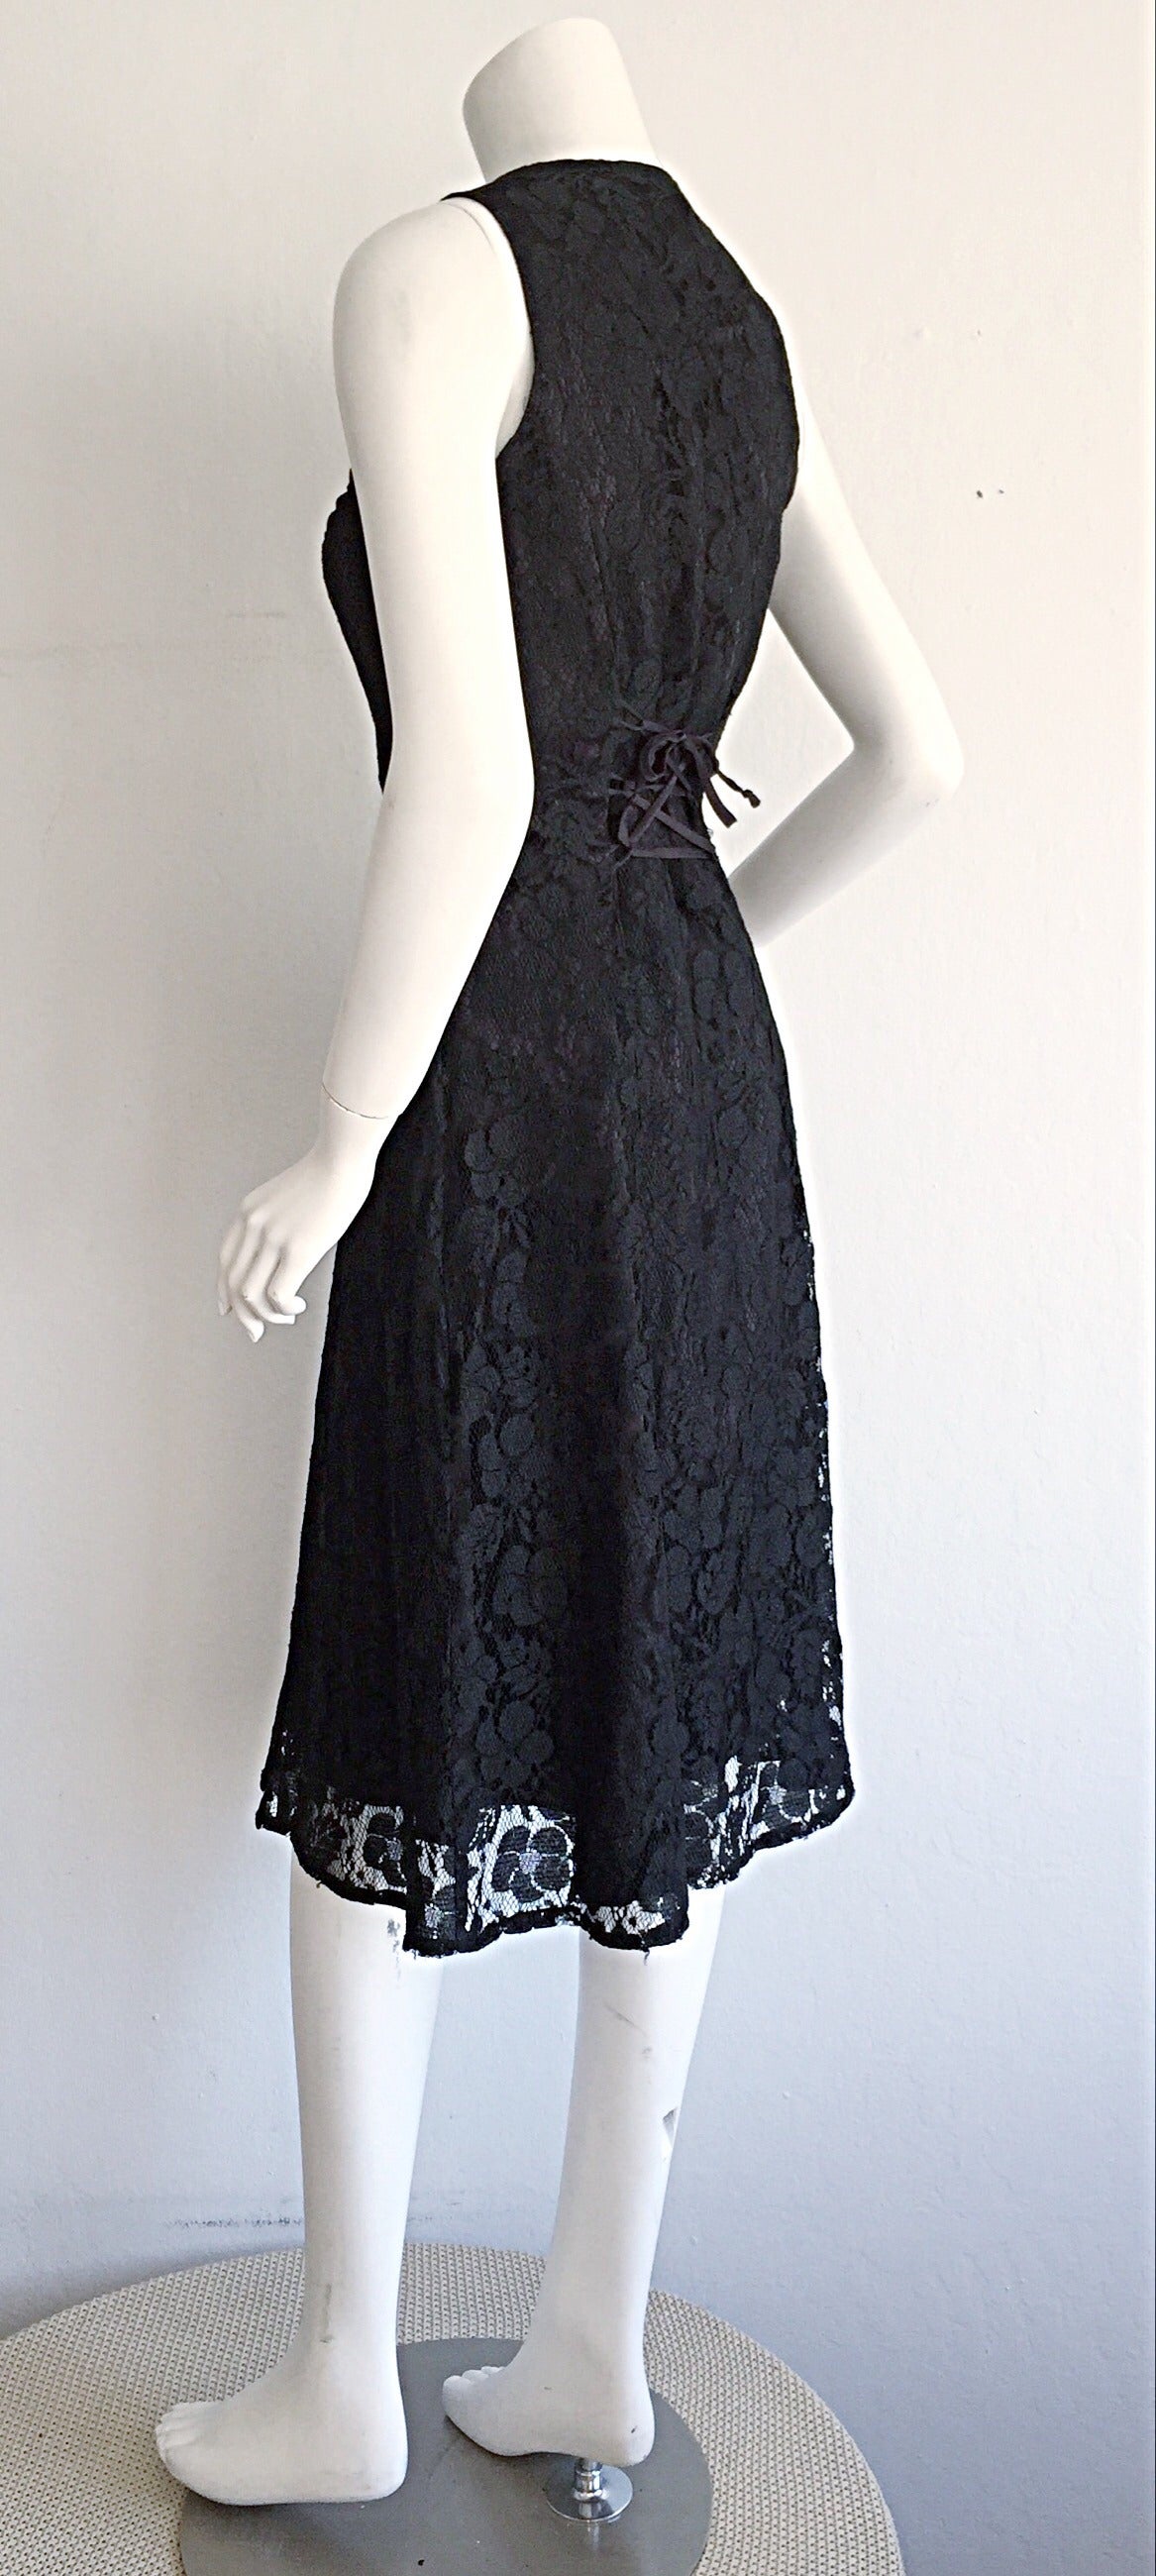 Paco Rabbane 1990s Black Lace Babydoll Dressw/ Rhinestone Buttons For Sale 1